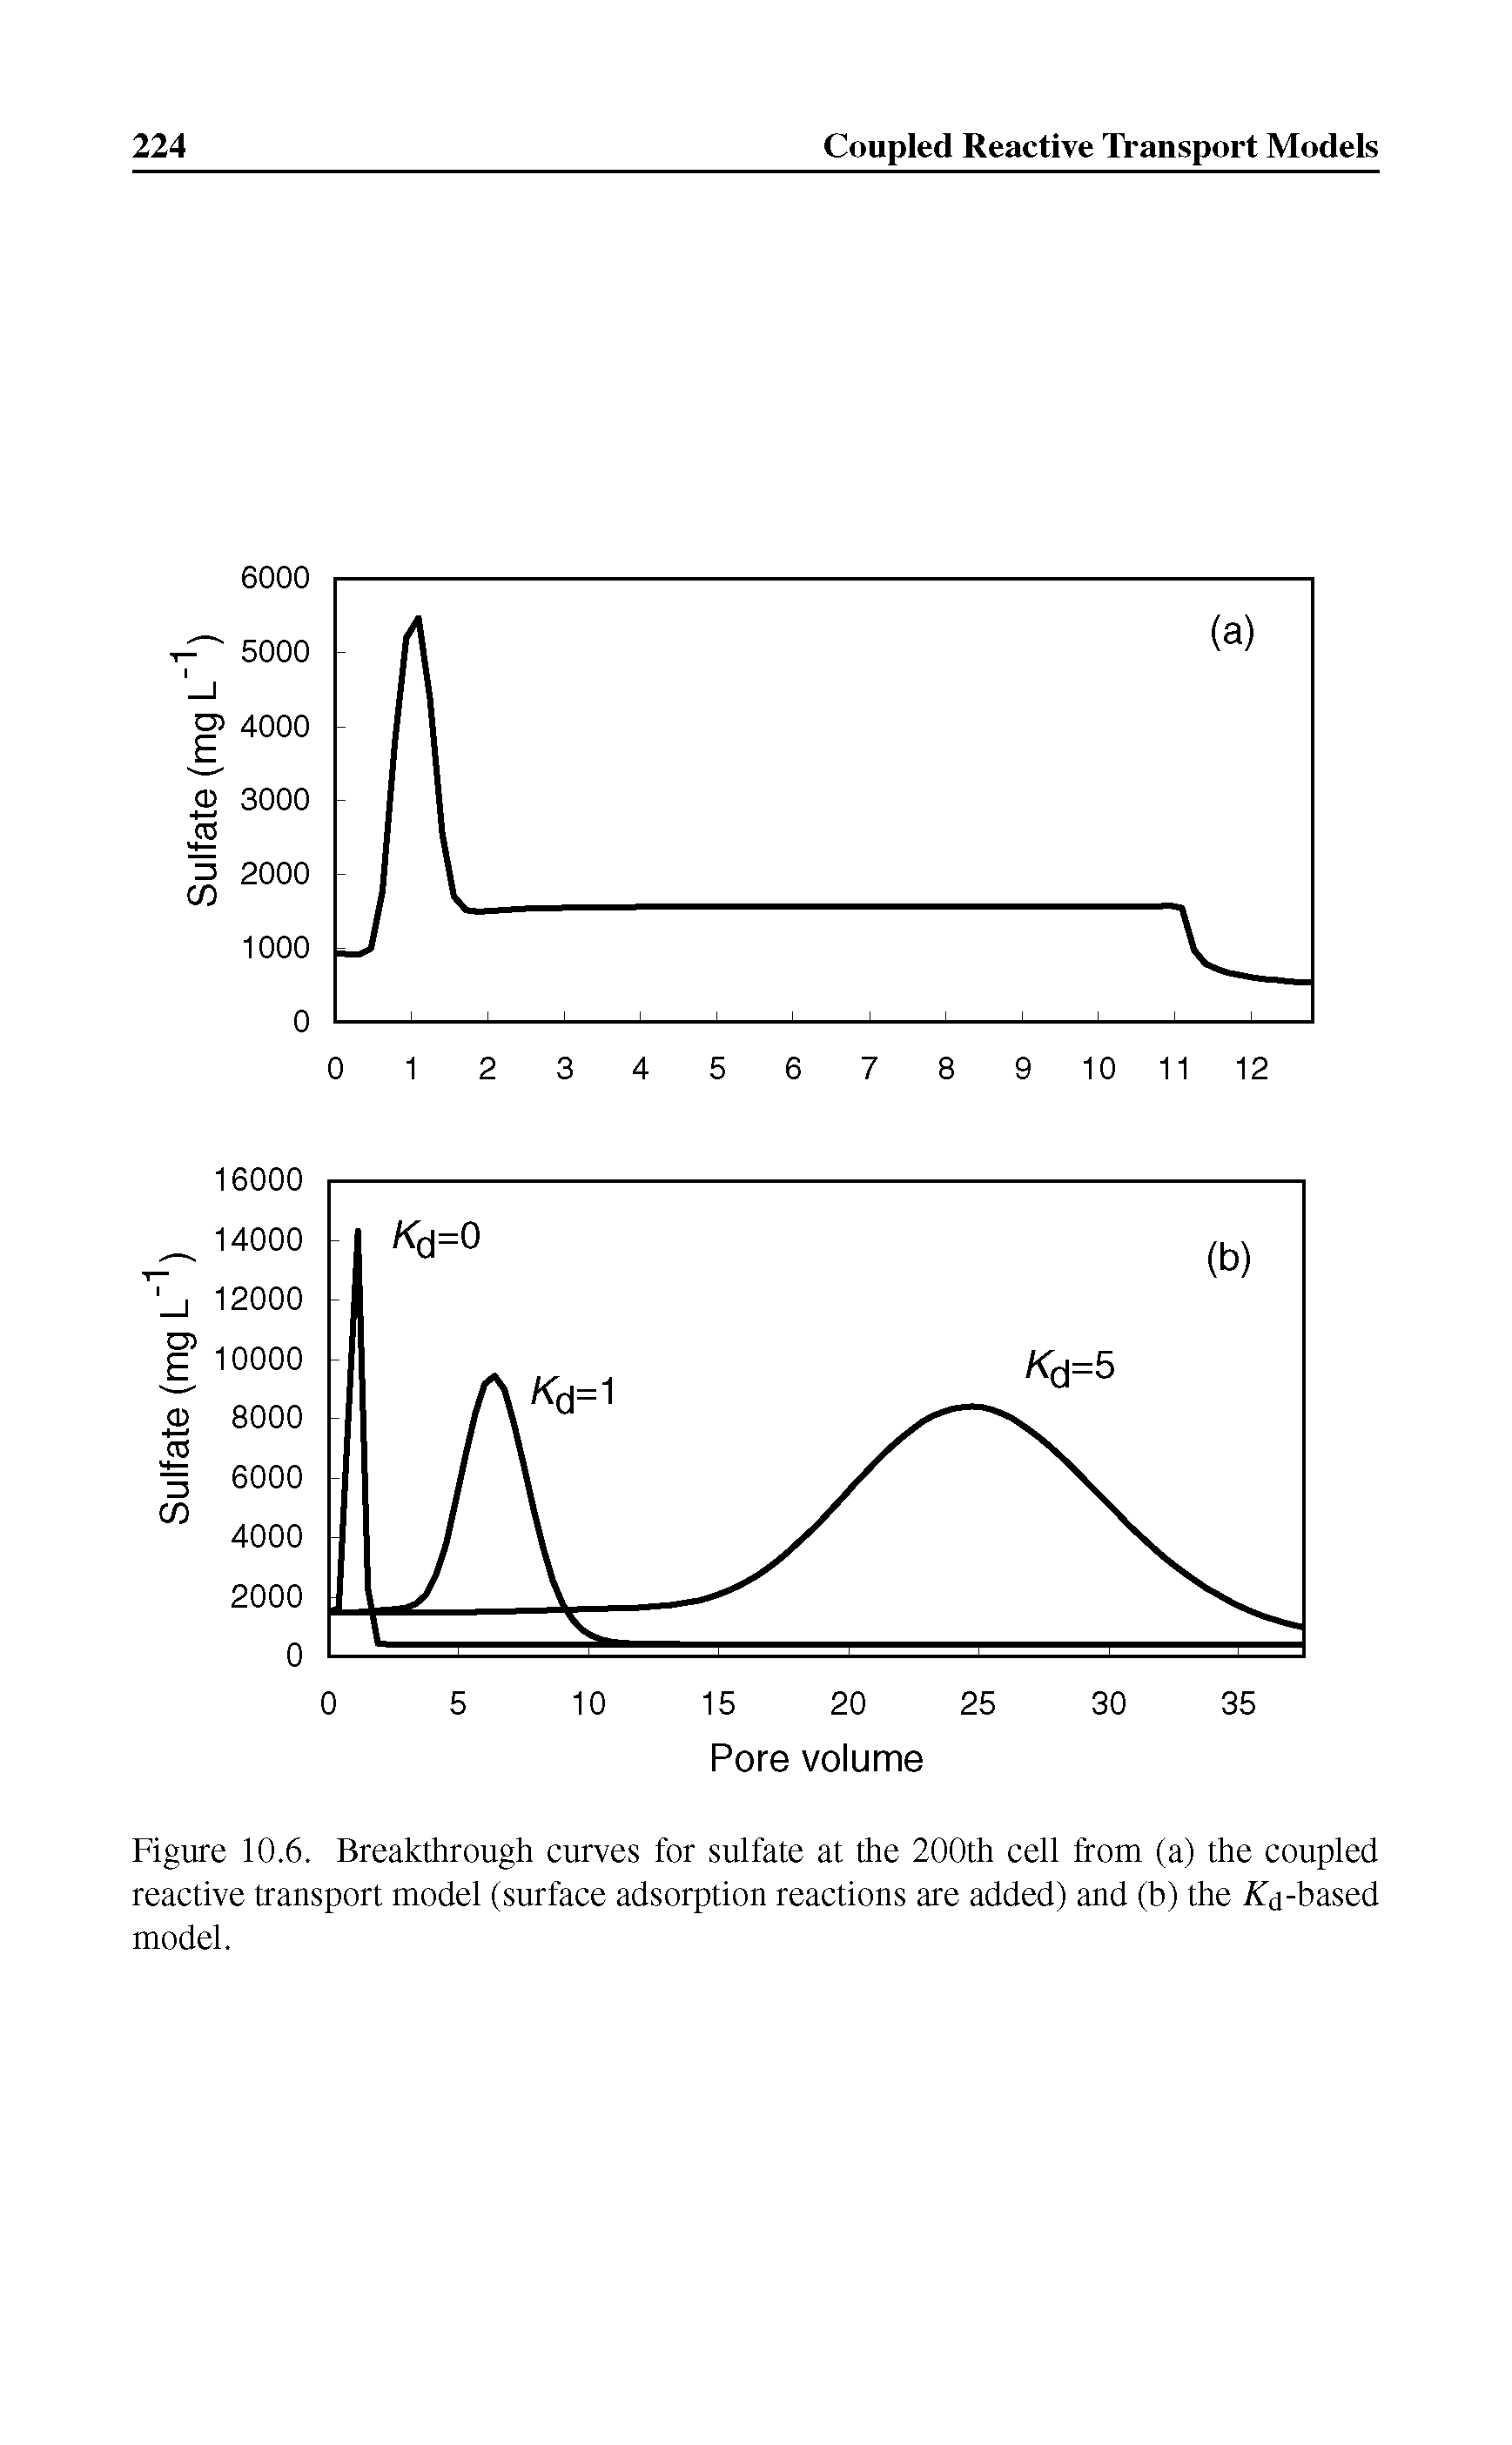 Figure 10.6. Breakthrough curves for sulfate at the 200th cell from (a) the coupled reactive transport model (surface adsorption reactions are added) and (b) the d-based model.